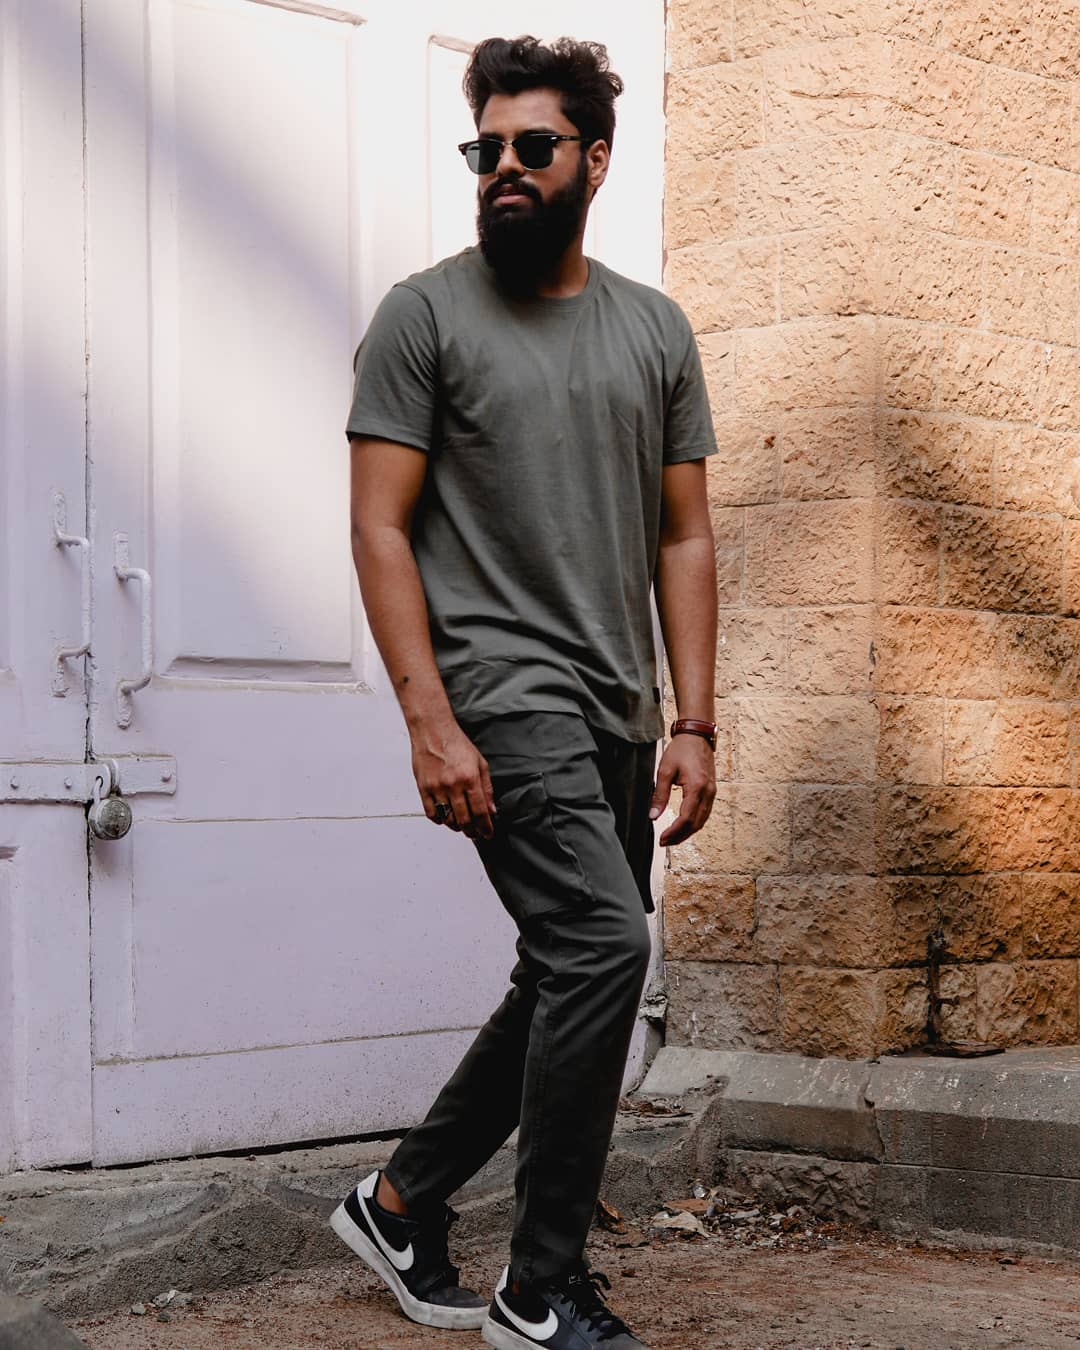 MYNTRA - The monochrome olive green look still rules streetstyle statements. Who agrees?
CLICK @thestylesetter_
Look up similar product code: 10384503 / 2291336 / 10945014 
For more on-point looks, st...